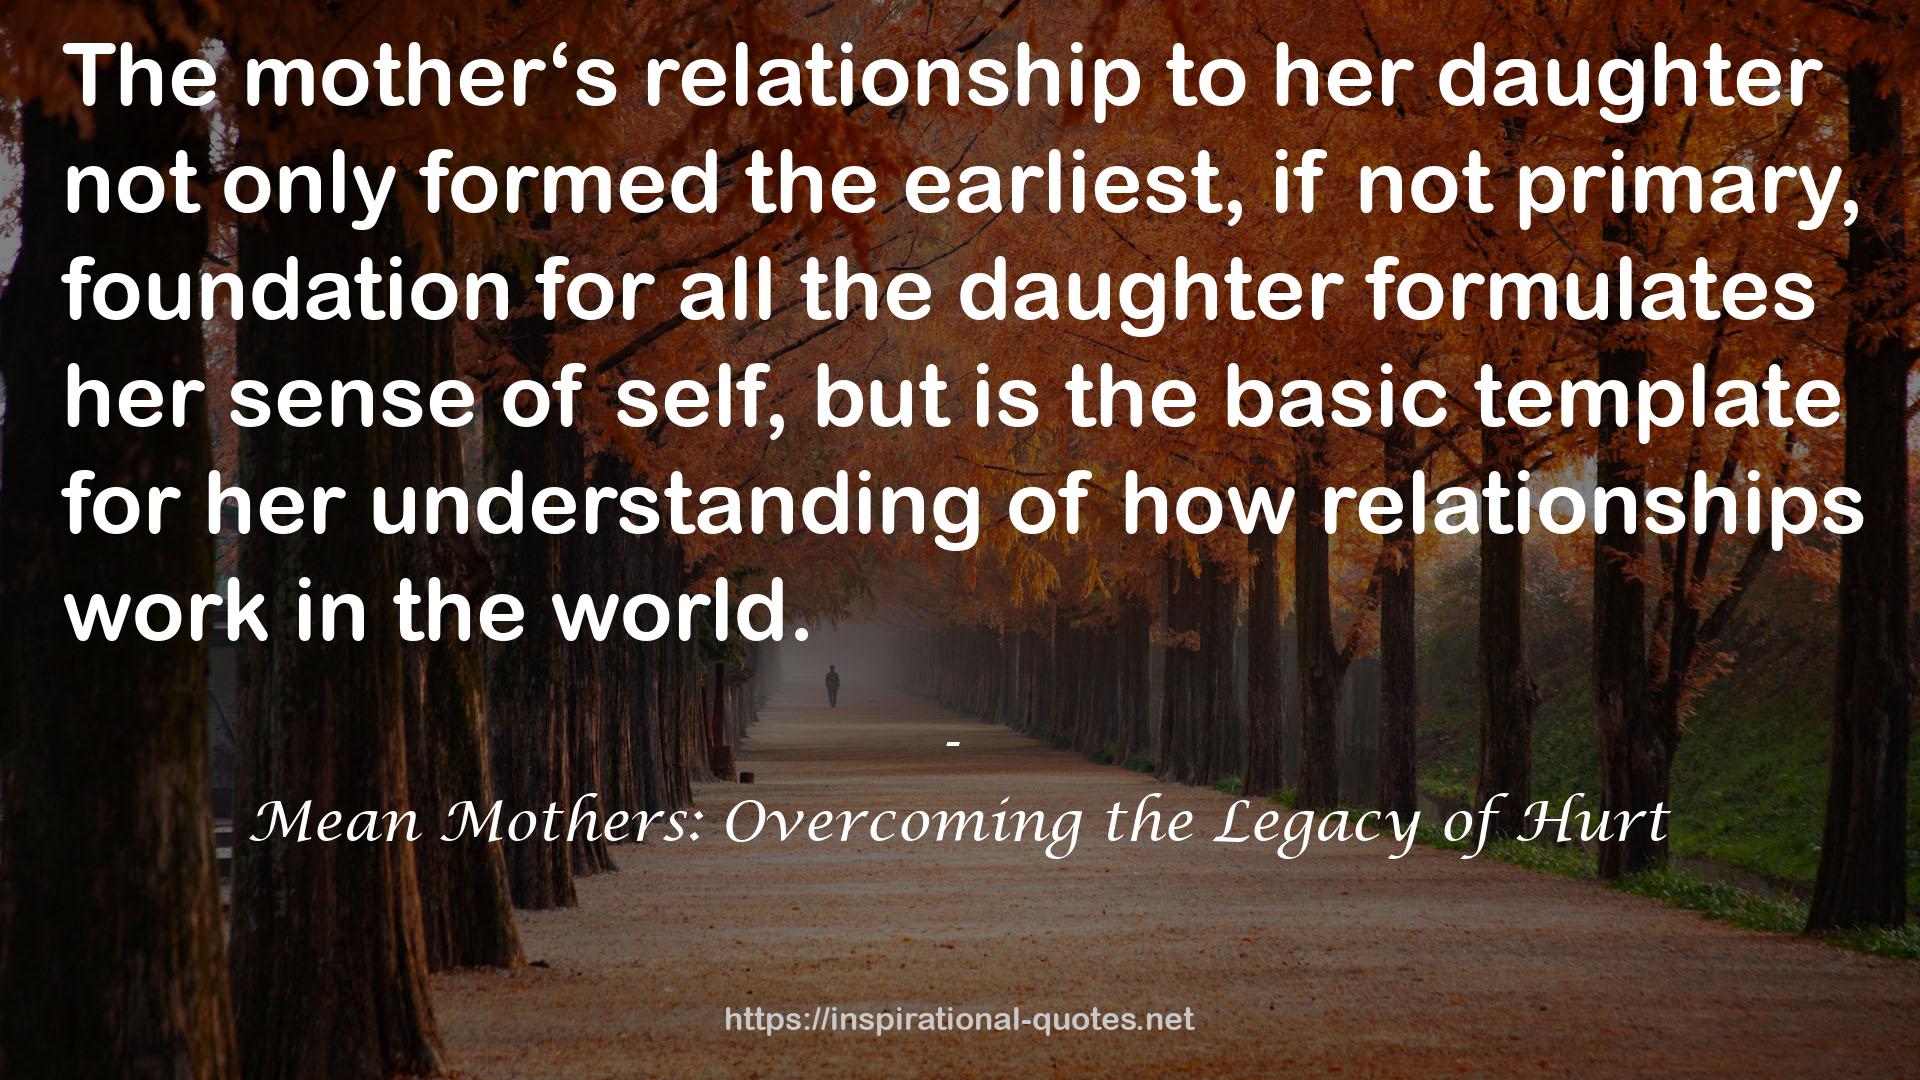 Mean Mothers: Overcoming the Legacy of Hurt QUOTES